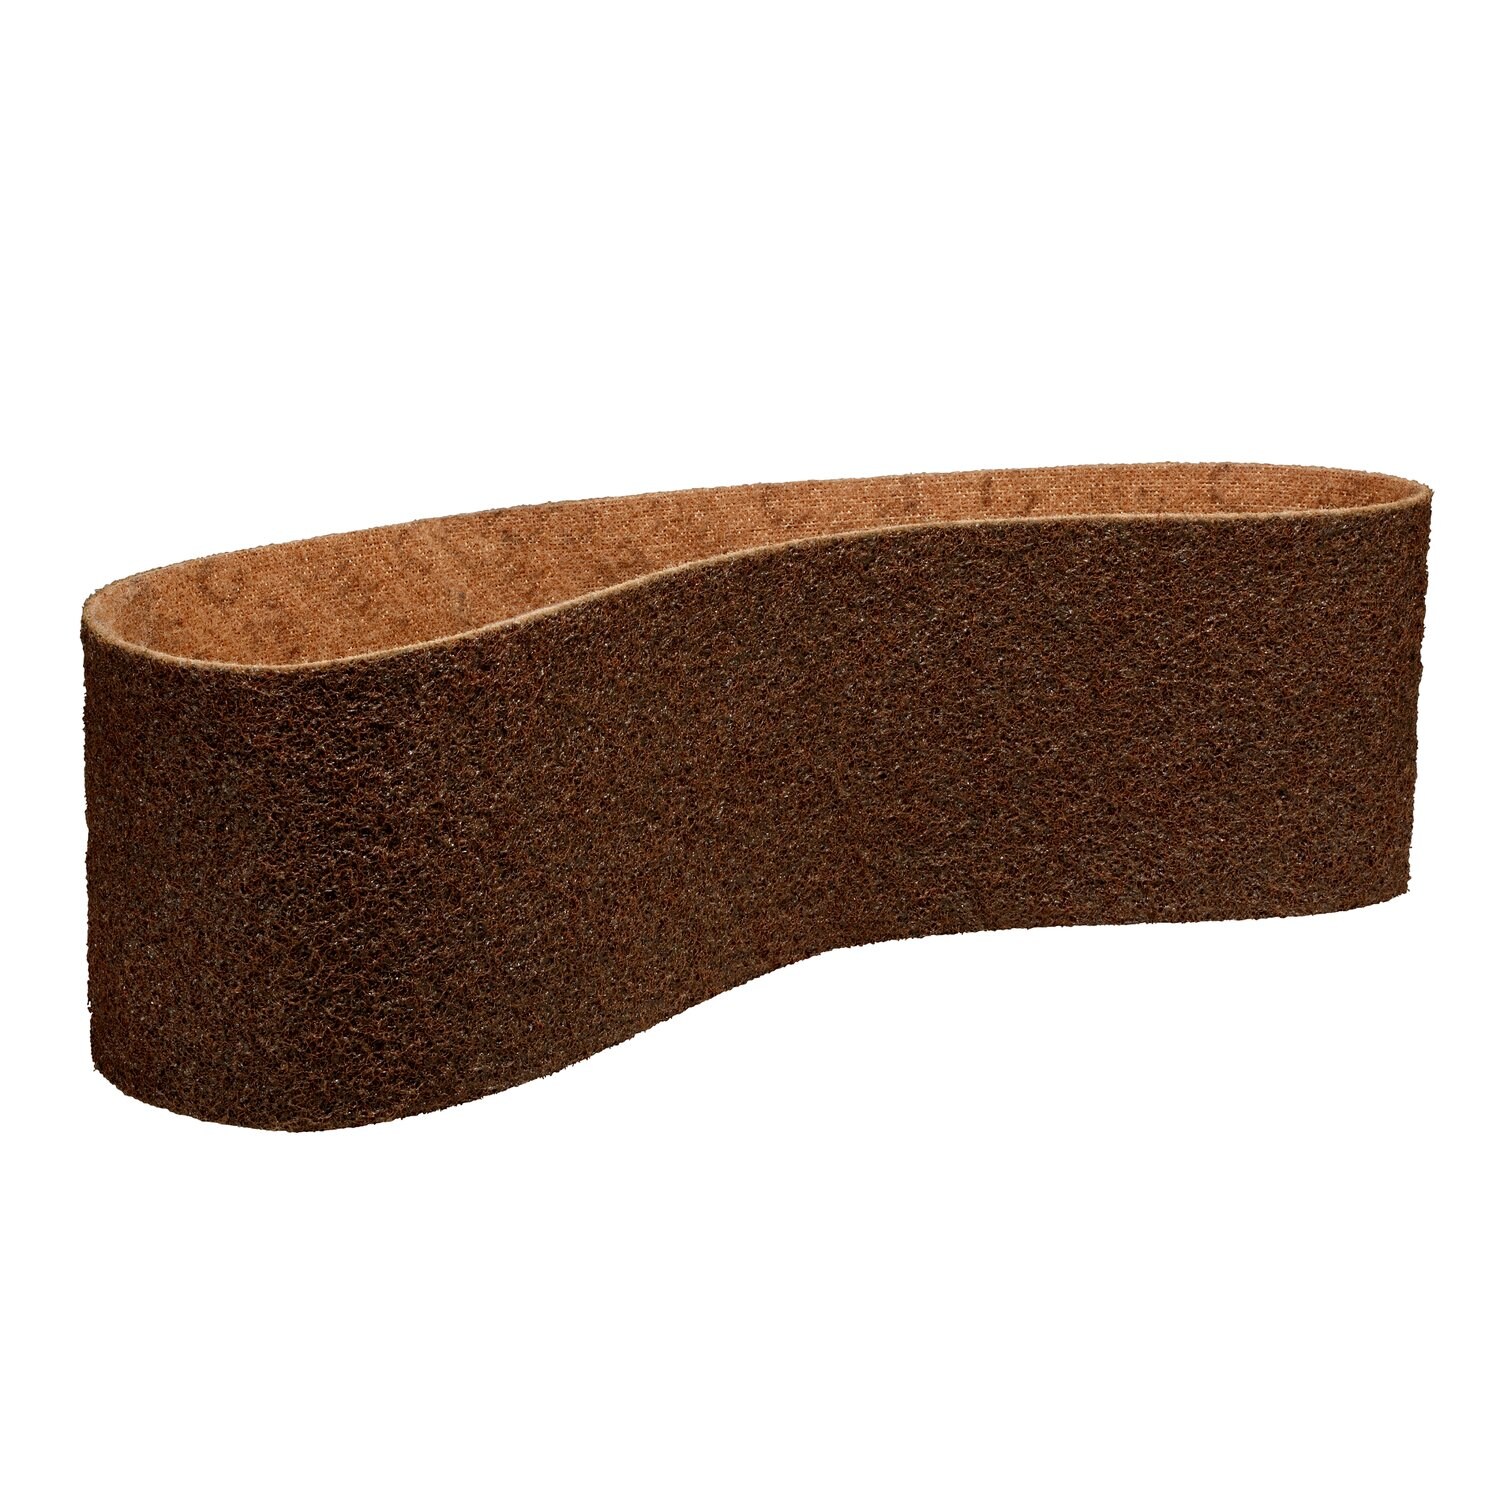 7000120727 - Scotch-Brite Surface Conditioning Belt, 6 in x 48 in, A CRS, 5 ea/Case